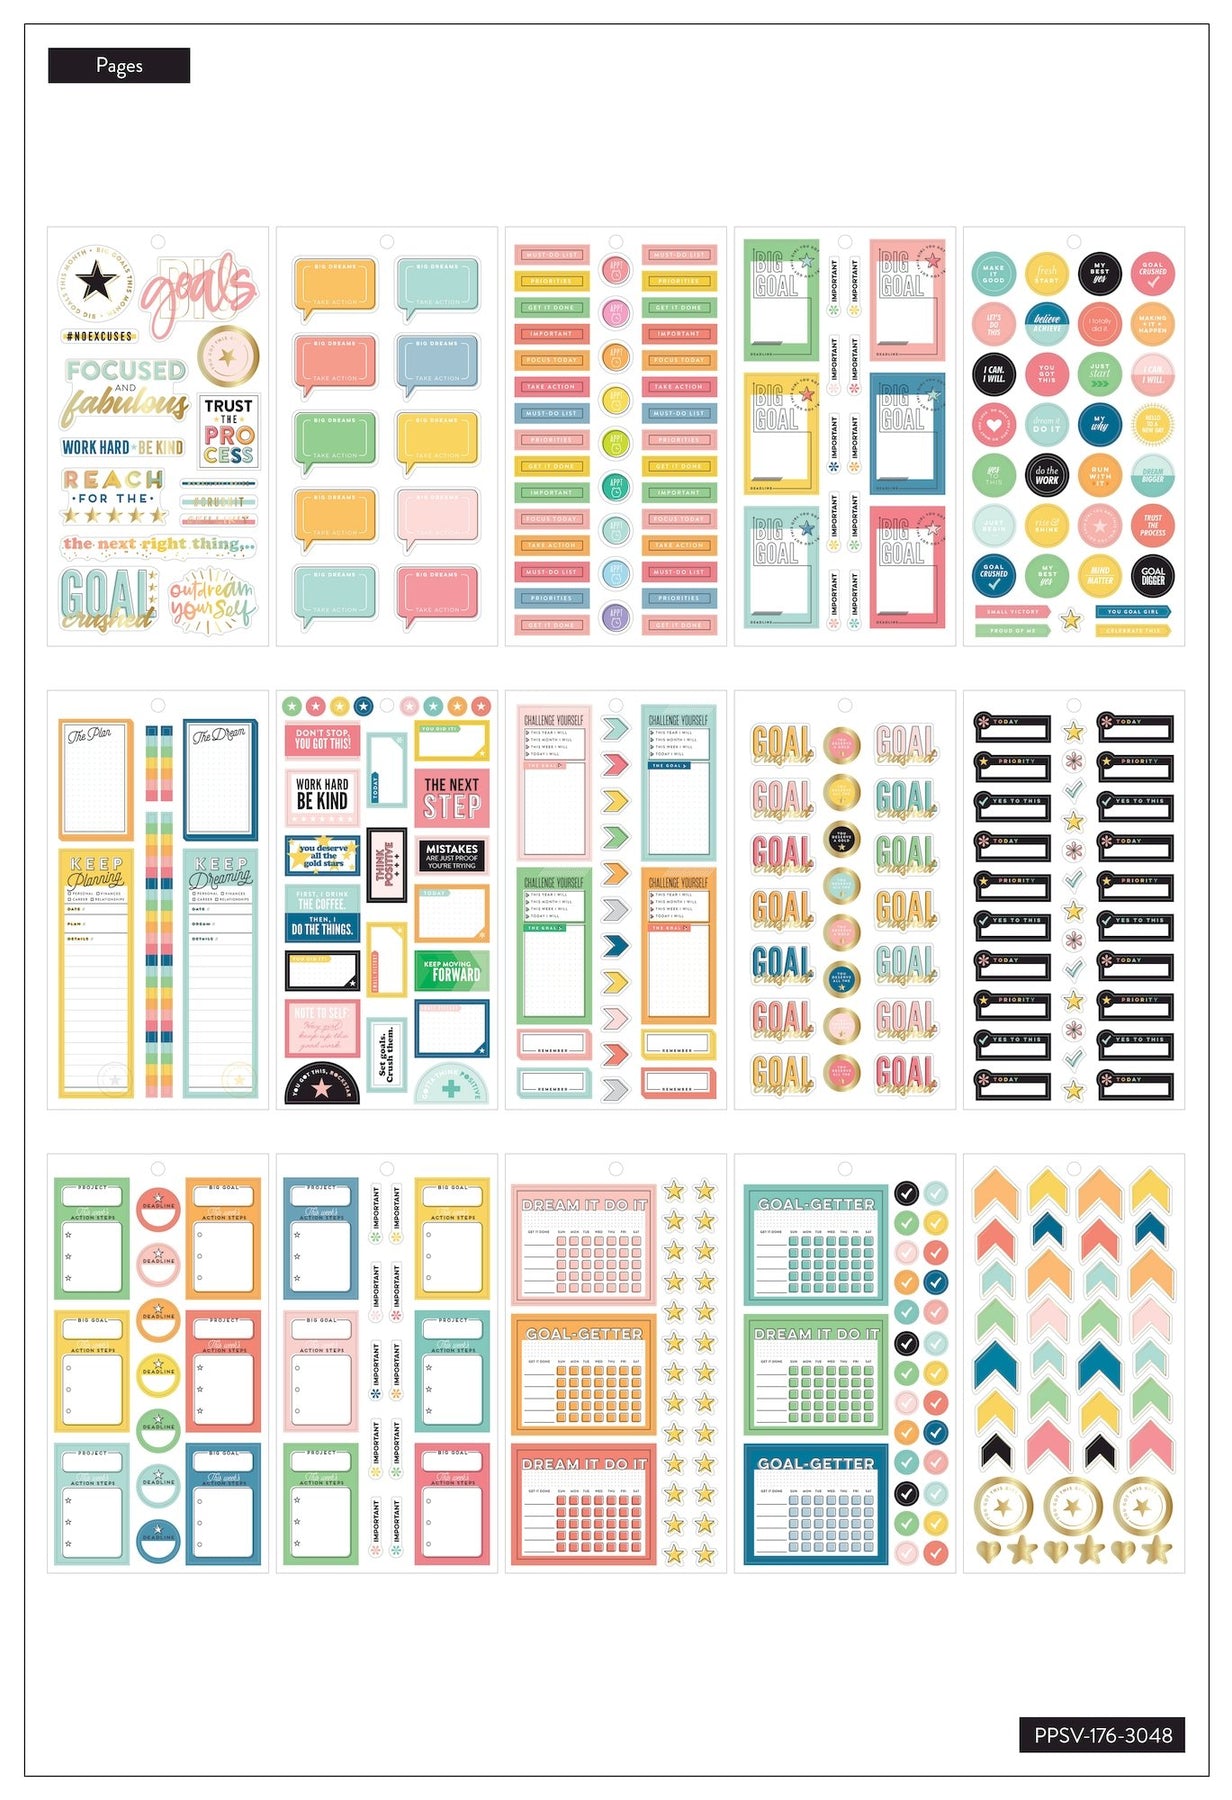 Wild Type - Value Pack Stickers – The Happy Planner